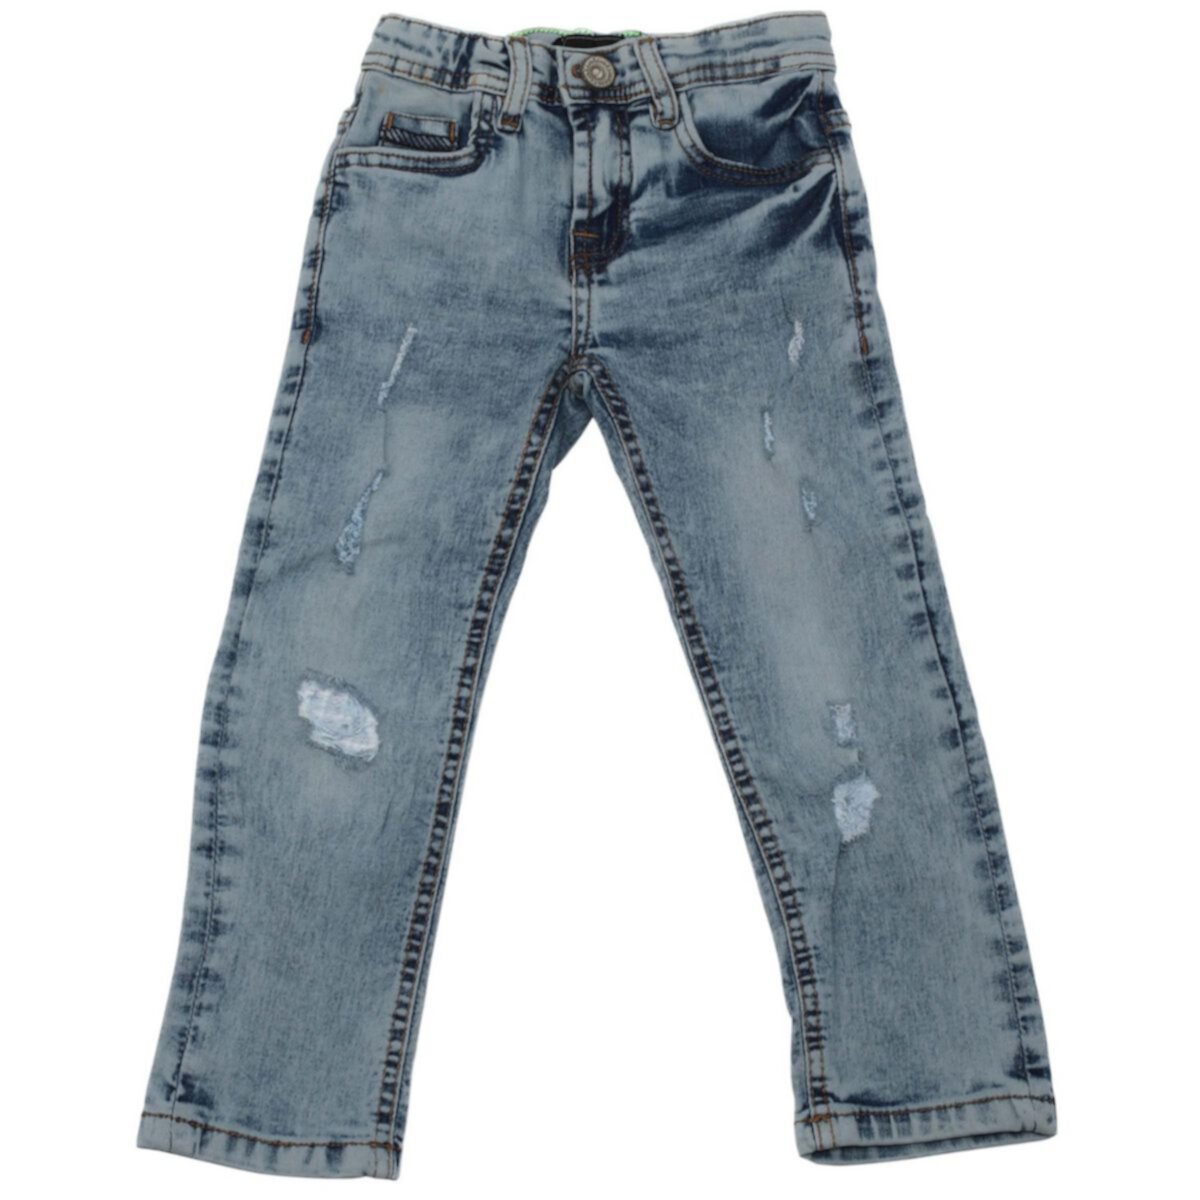 Toddler Boys 2t-4t Fashion Rip & Repair Jeans With Details On Knee RawX